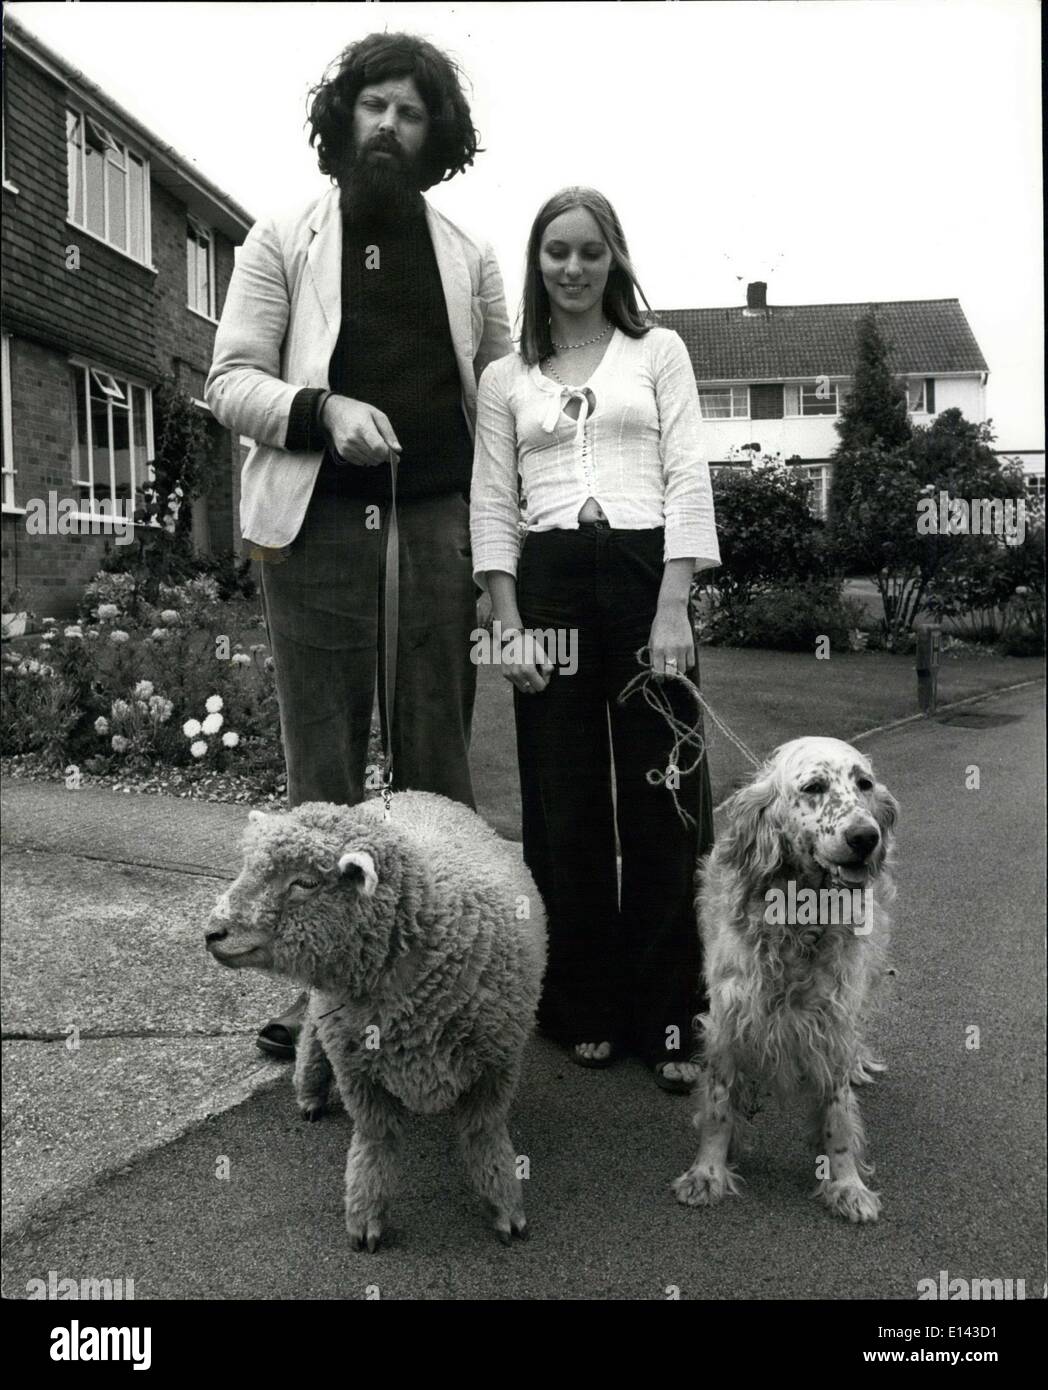 Apr. 04, 2012 - Carilyn had a little lamd.: People may stare, but Carilyn Oddyof Otford, Kent, doesn't think it's unusual to take her pet sheep, Victoria, out for walks along with the dog star. Neither do star or Victoria! They get on famously, and even travel with the 19-year-old teacher training student by car. 3=4 Out for the morning strill is Carilyn with her friend Roger Airey from Sh Stock Photo